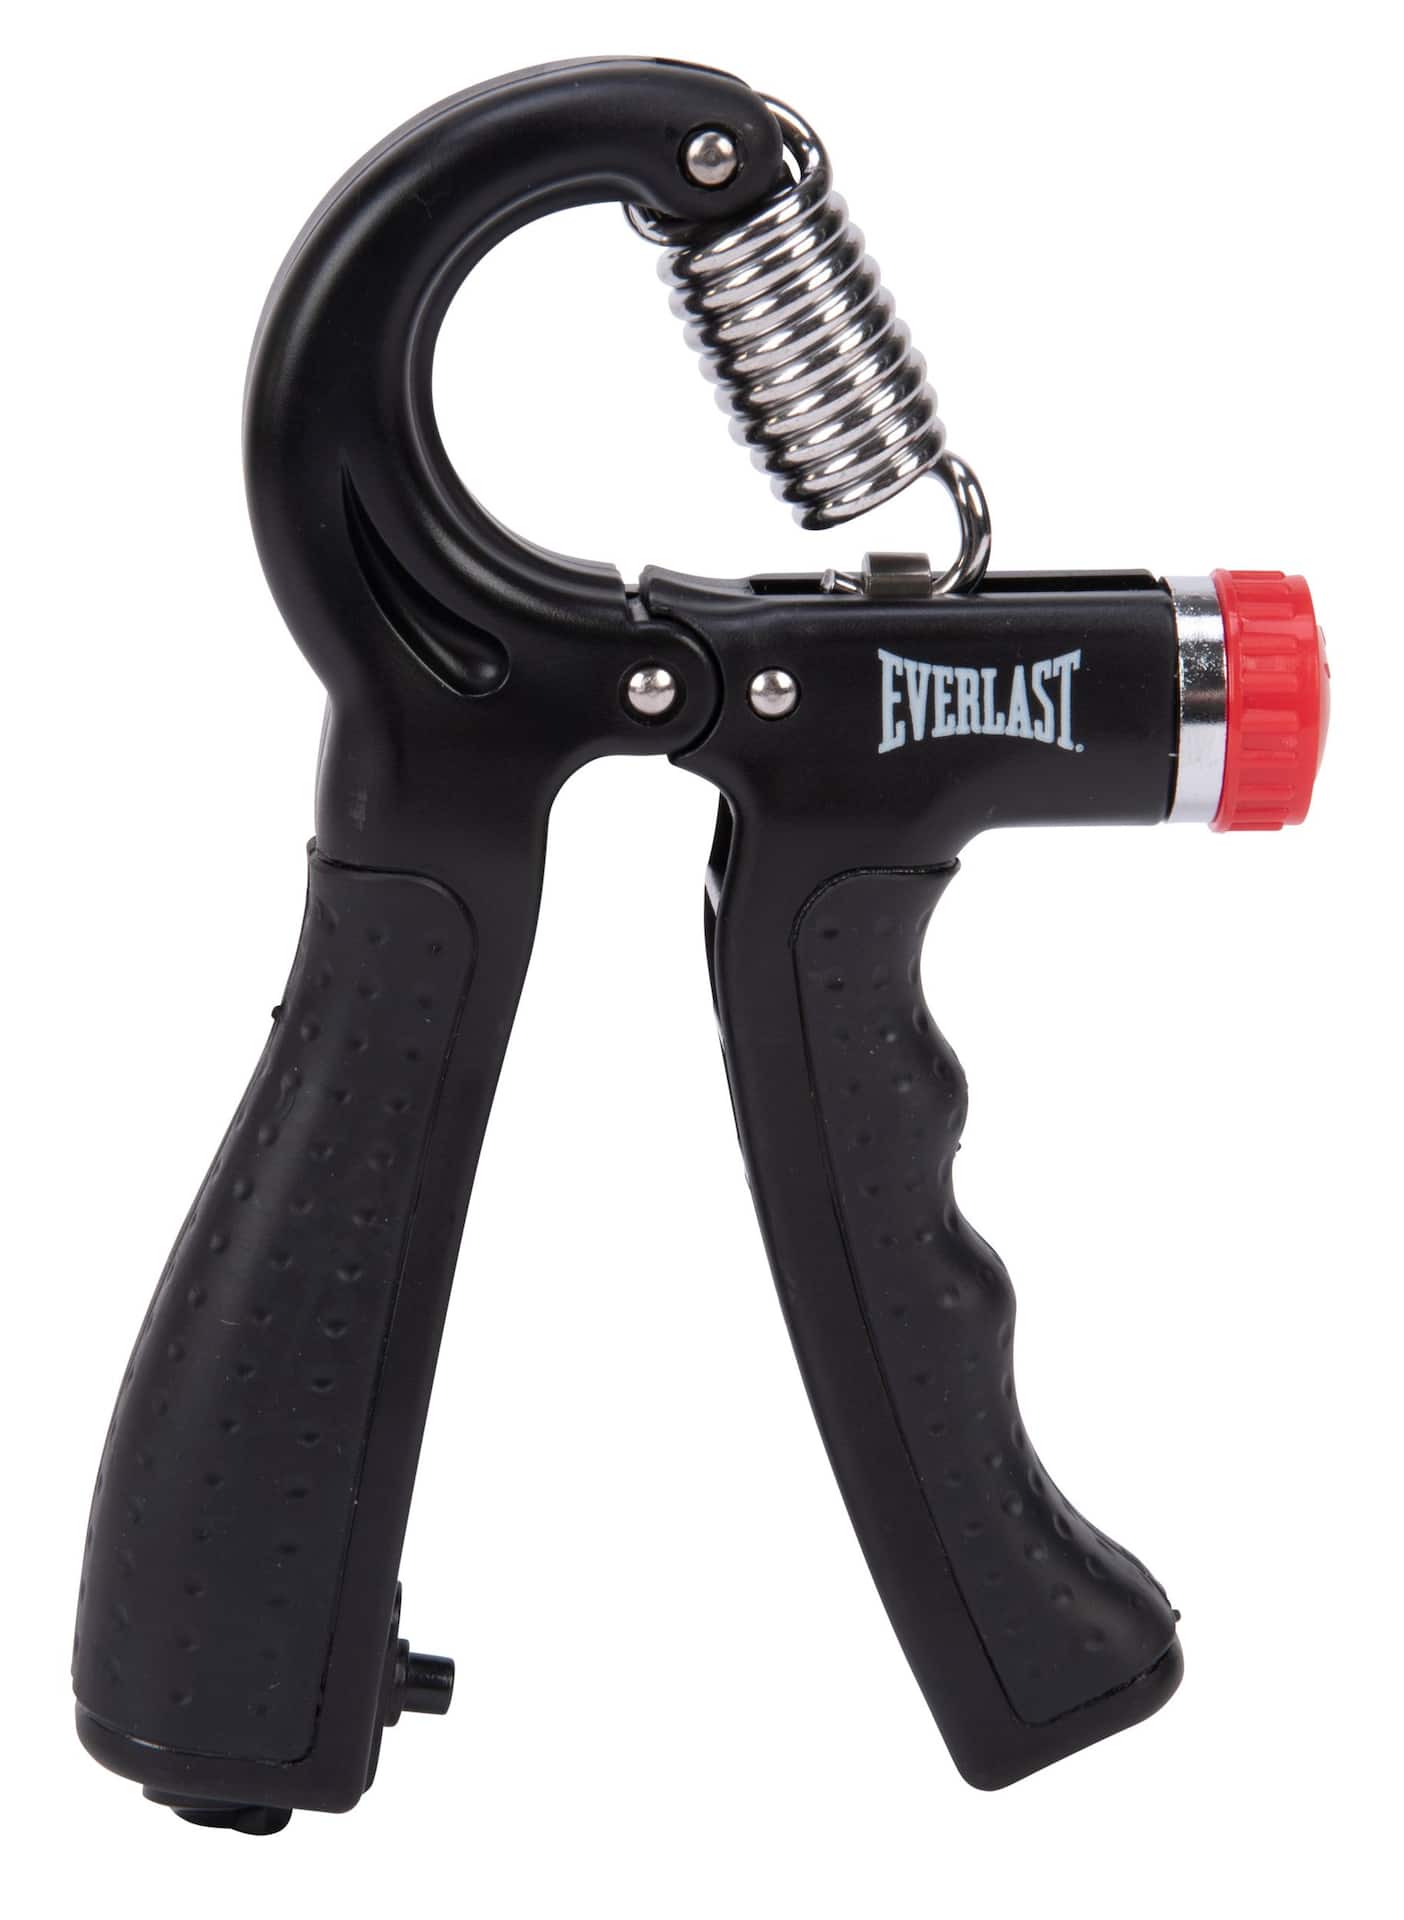 https://media-www.canadiantire.ca/product/playing/exercise/exercise-accessories/1841218/everlast-adjustable-hand-grips-a9eda750-cb0d-4995-a89c-84dec9e663a1-jpgrendition.jpg